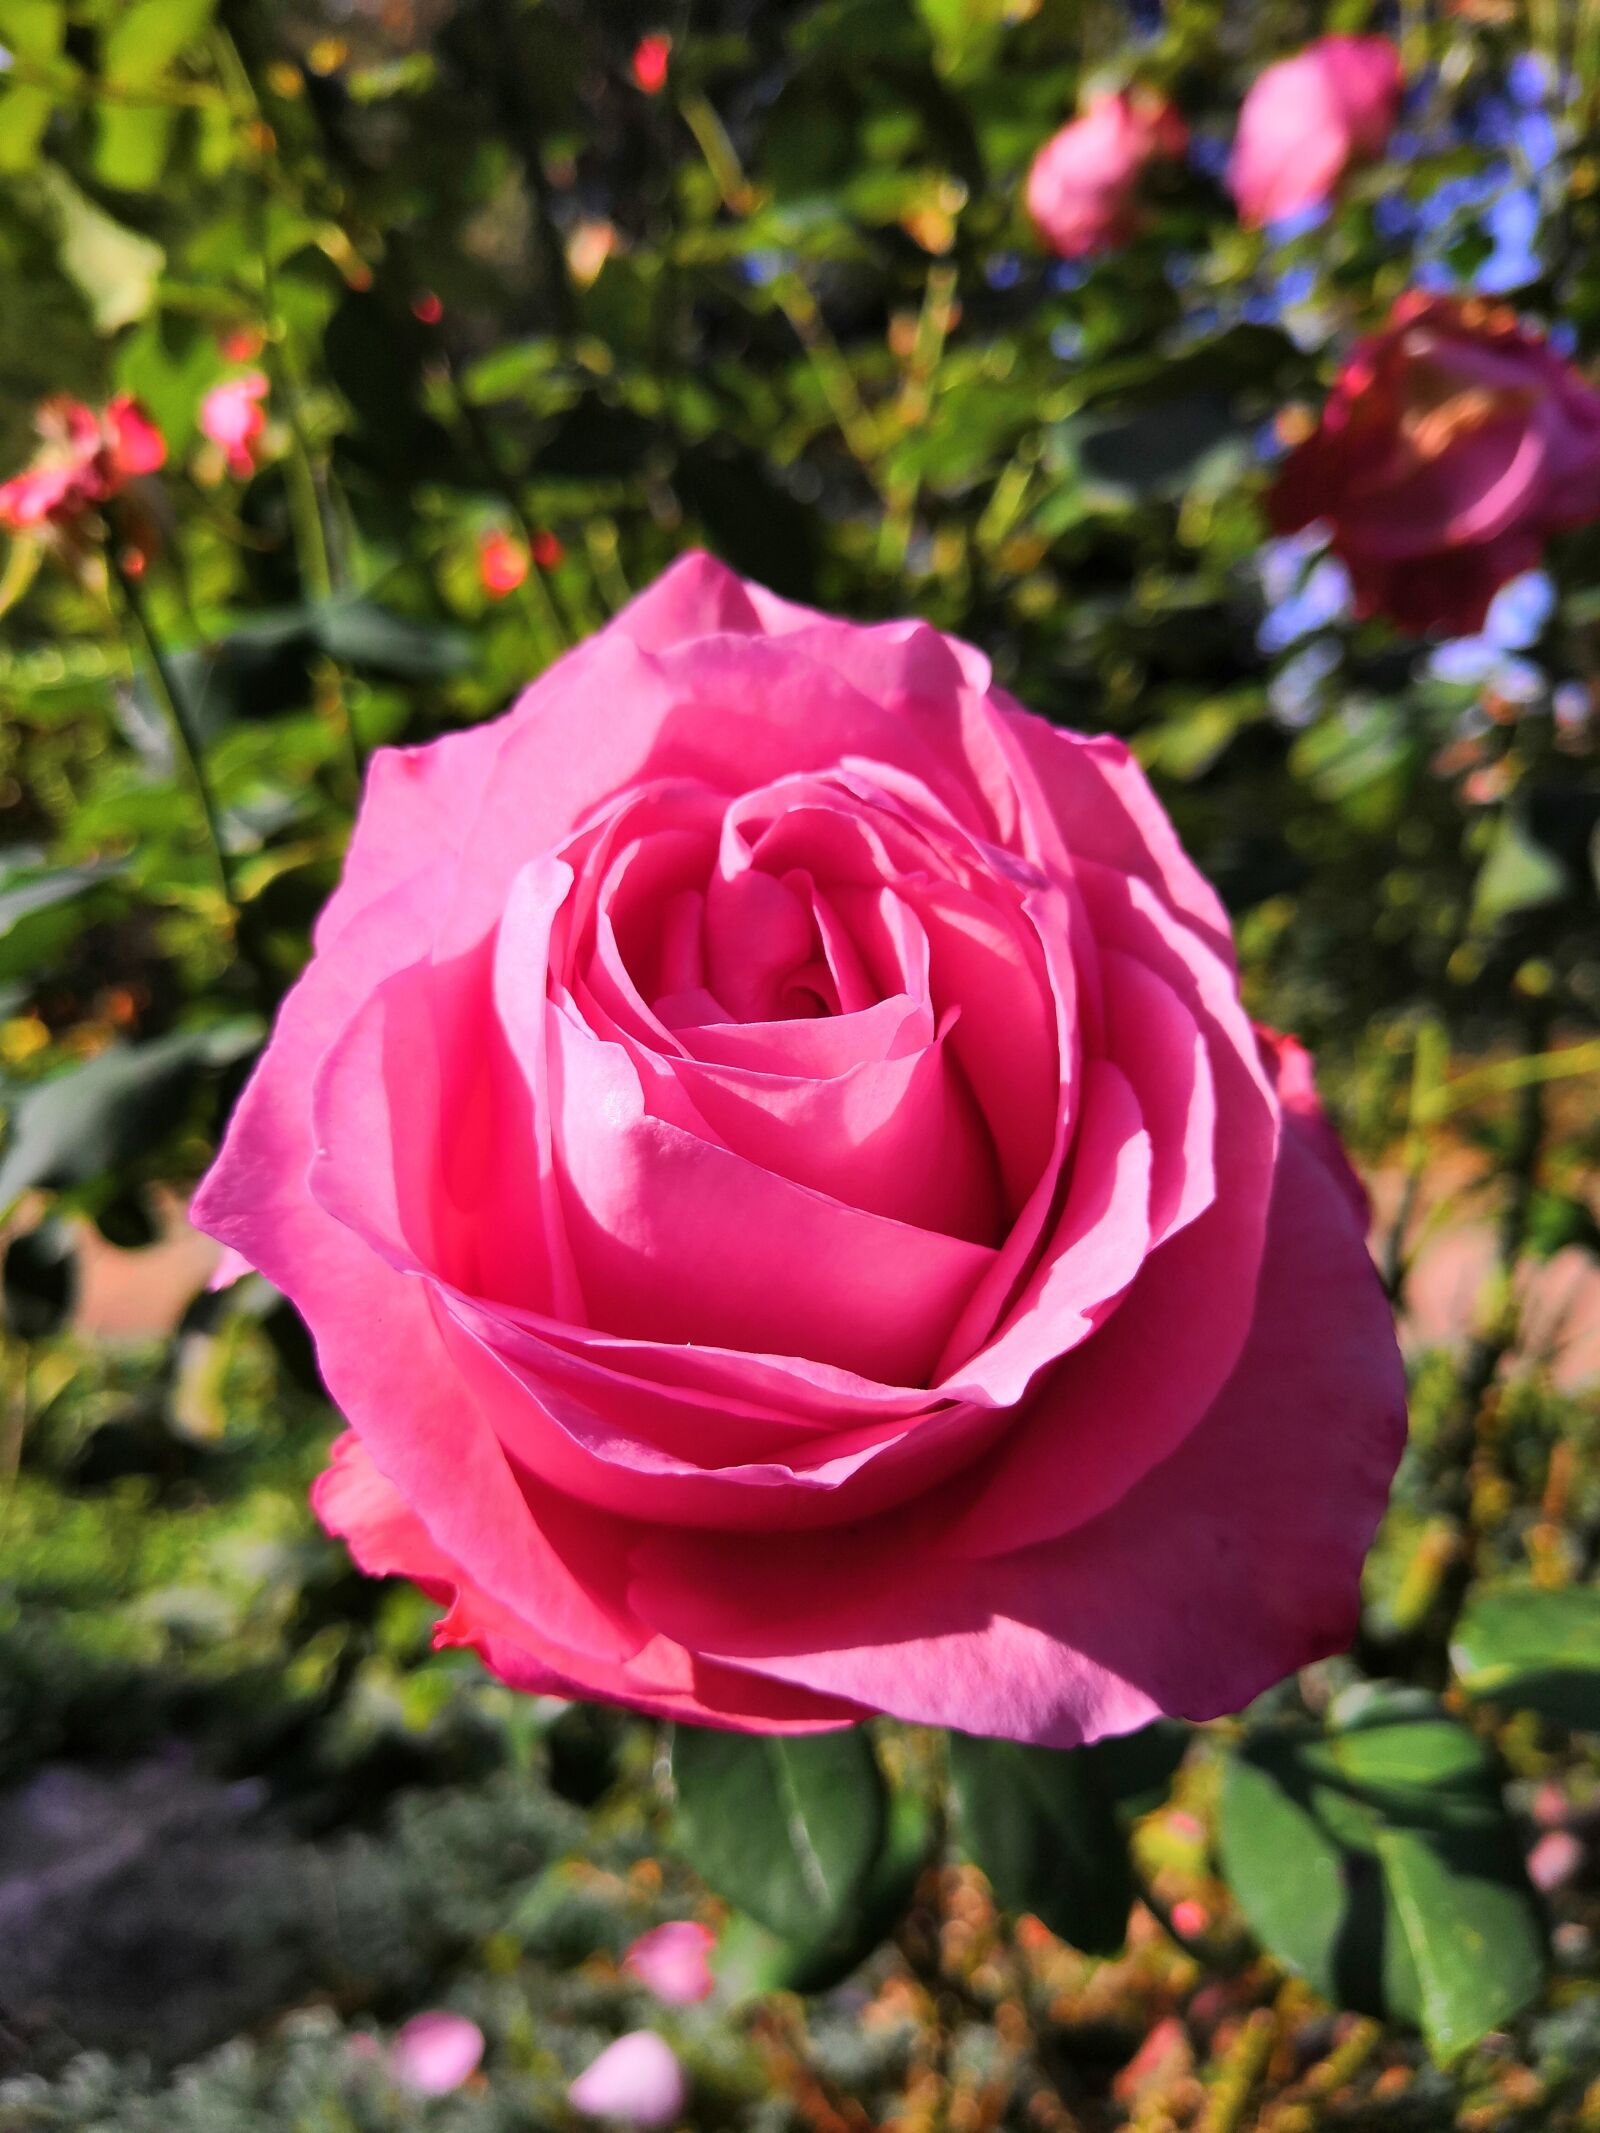 HUAWEI Honor 10 sample photo. Rose, flower, pink rose photography